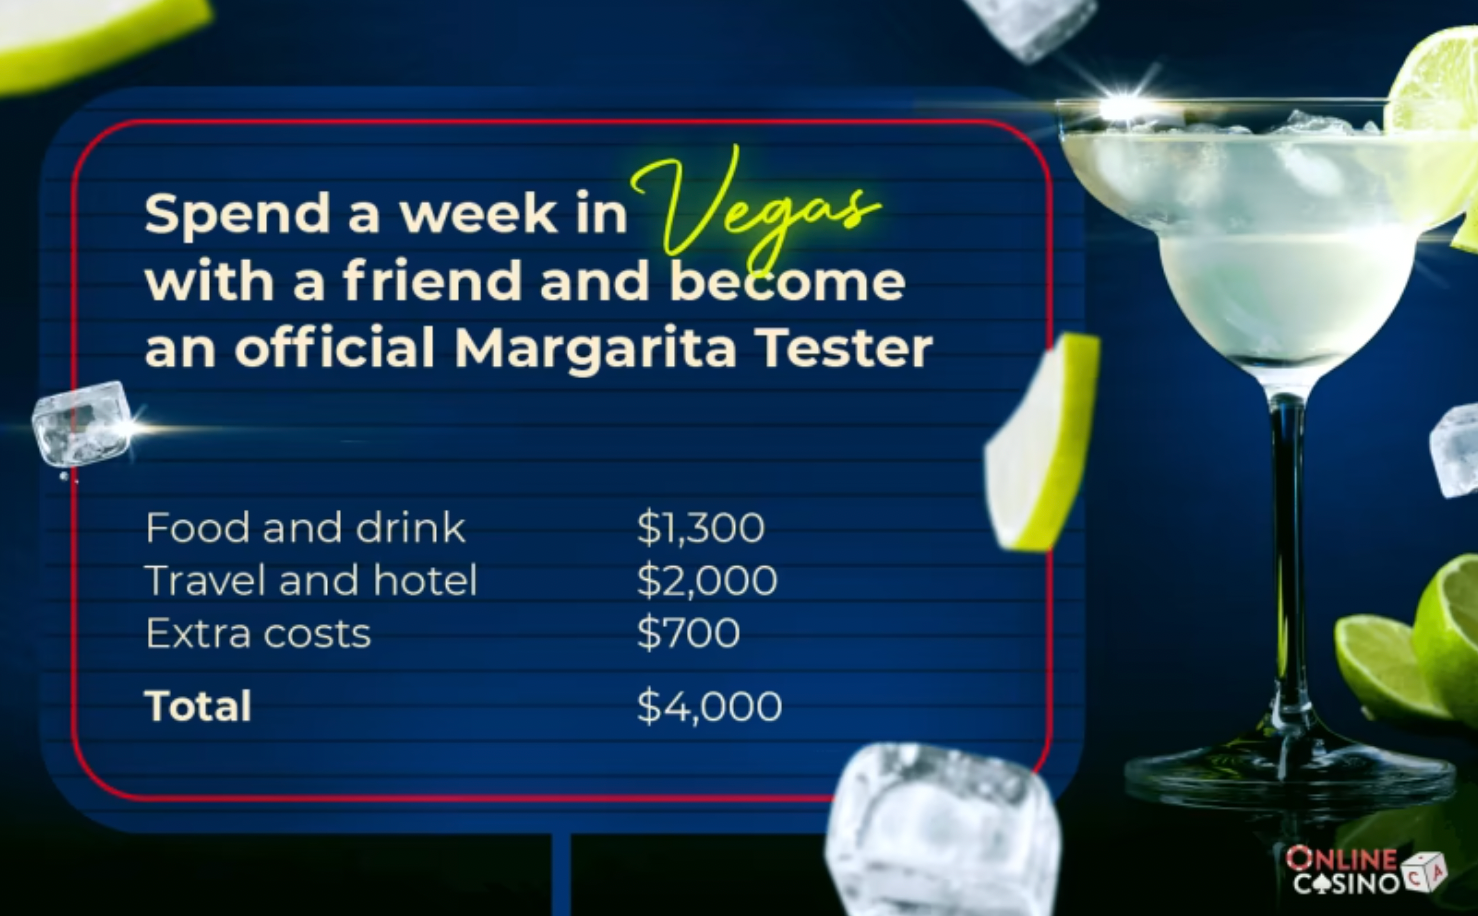 Margarita Tester job for you and your friend to be paid over £3000 to travel  to Las Vegas